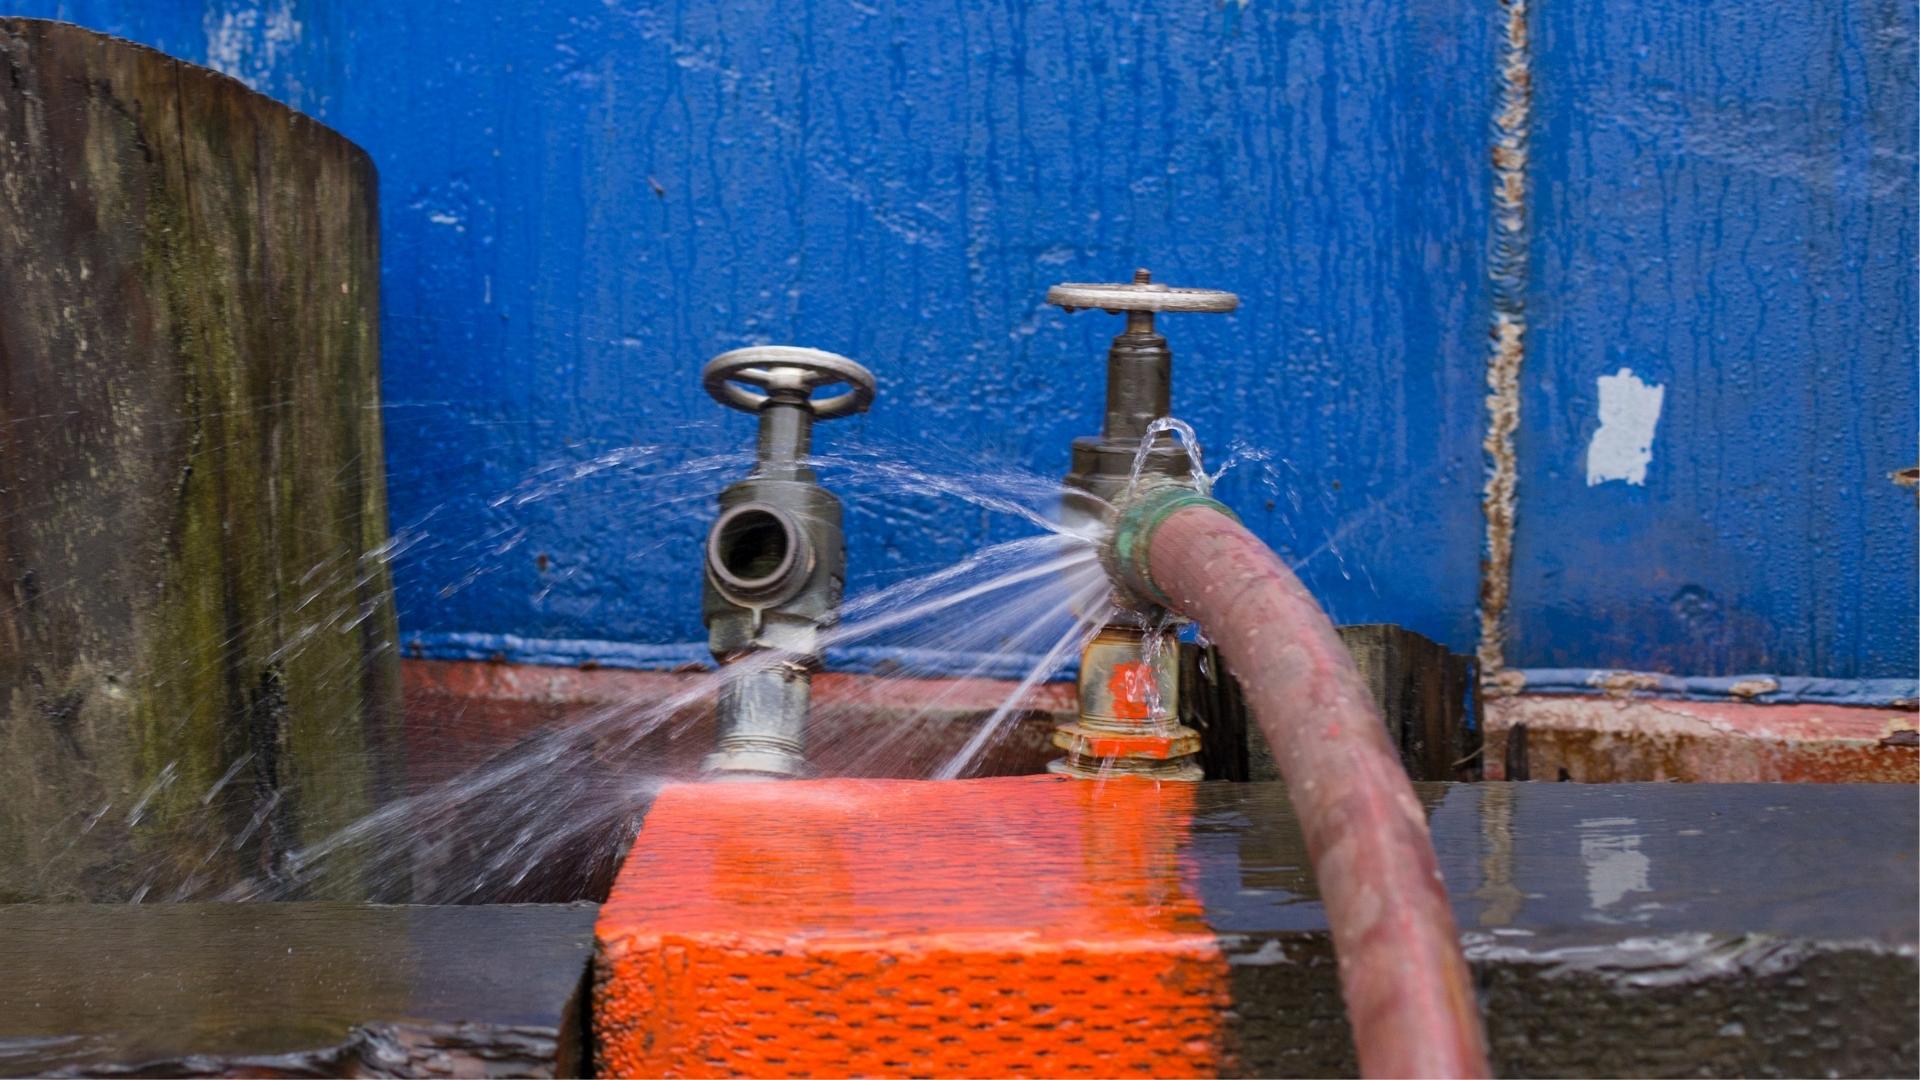 Photo of an ill-fitting hose spraying water